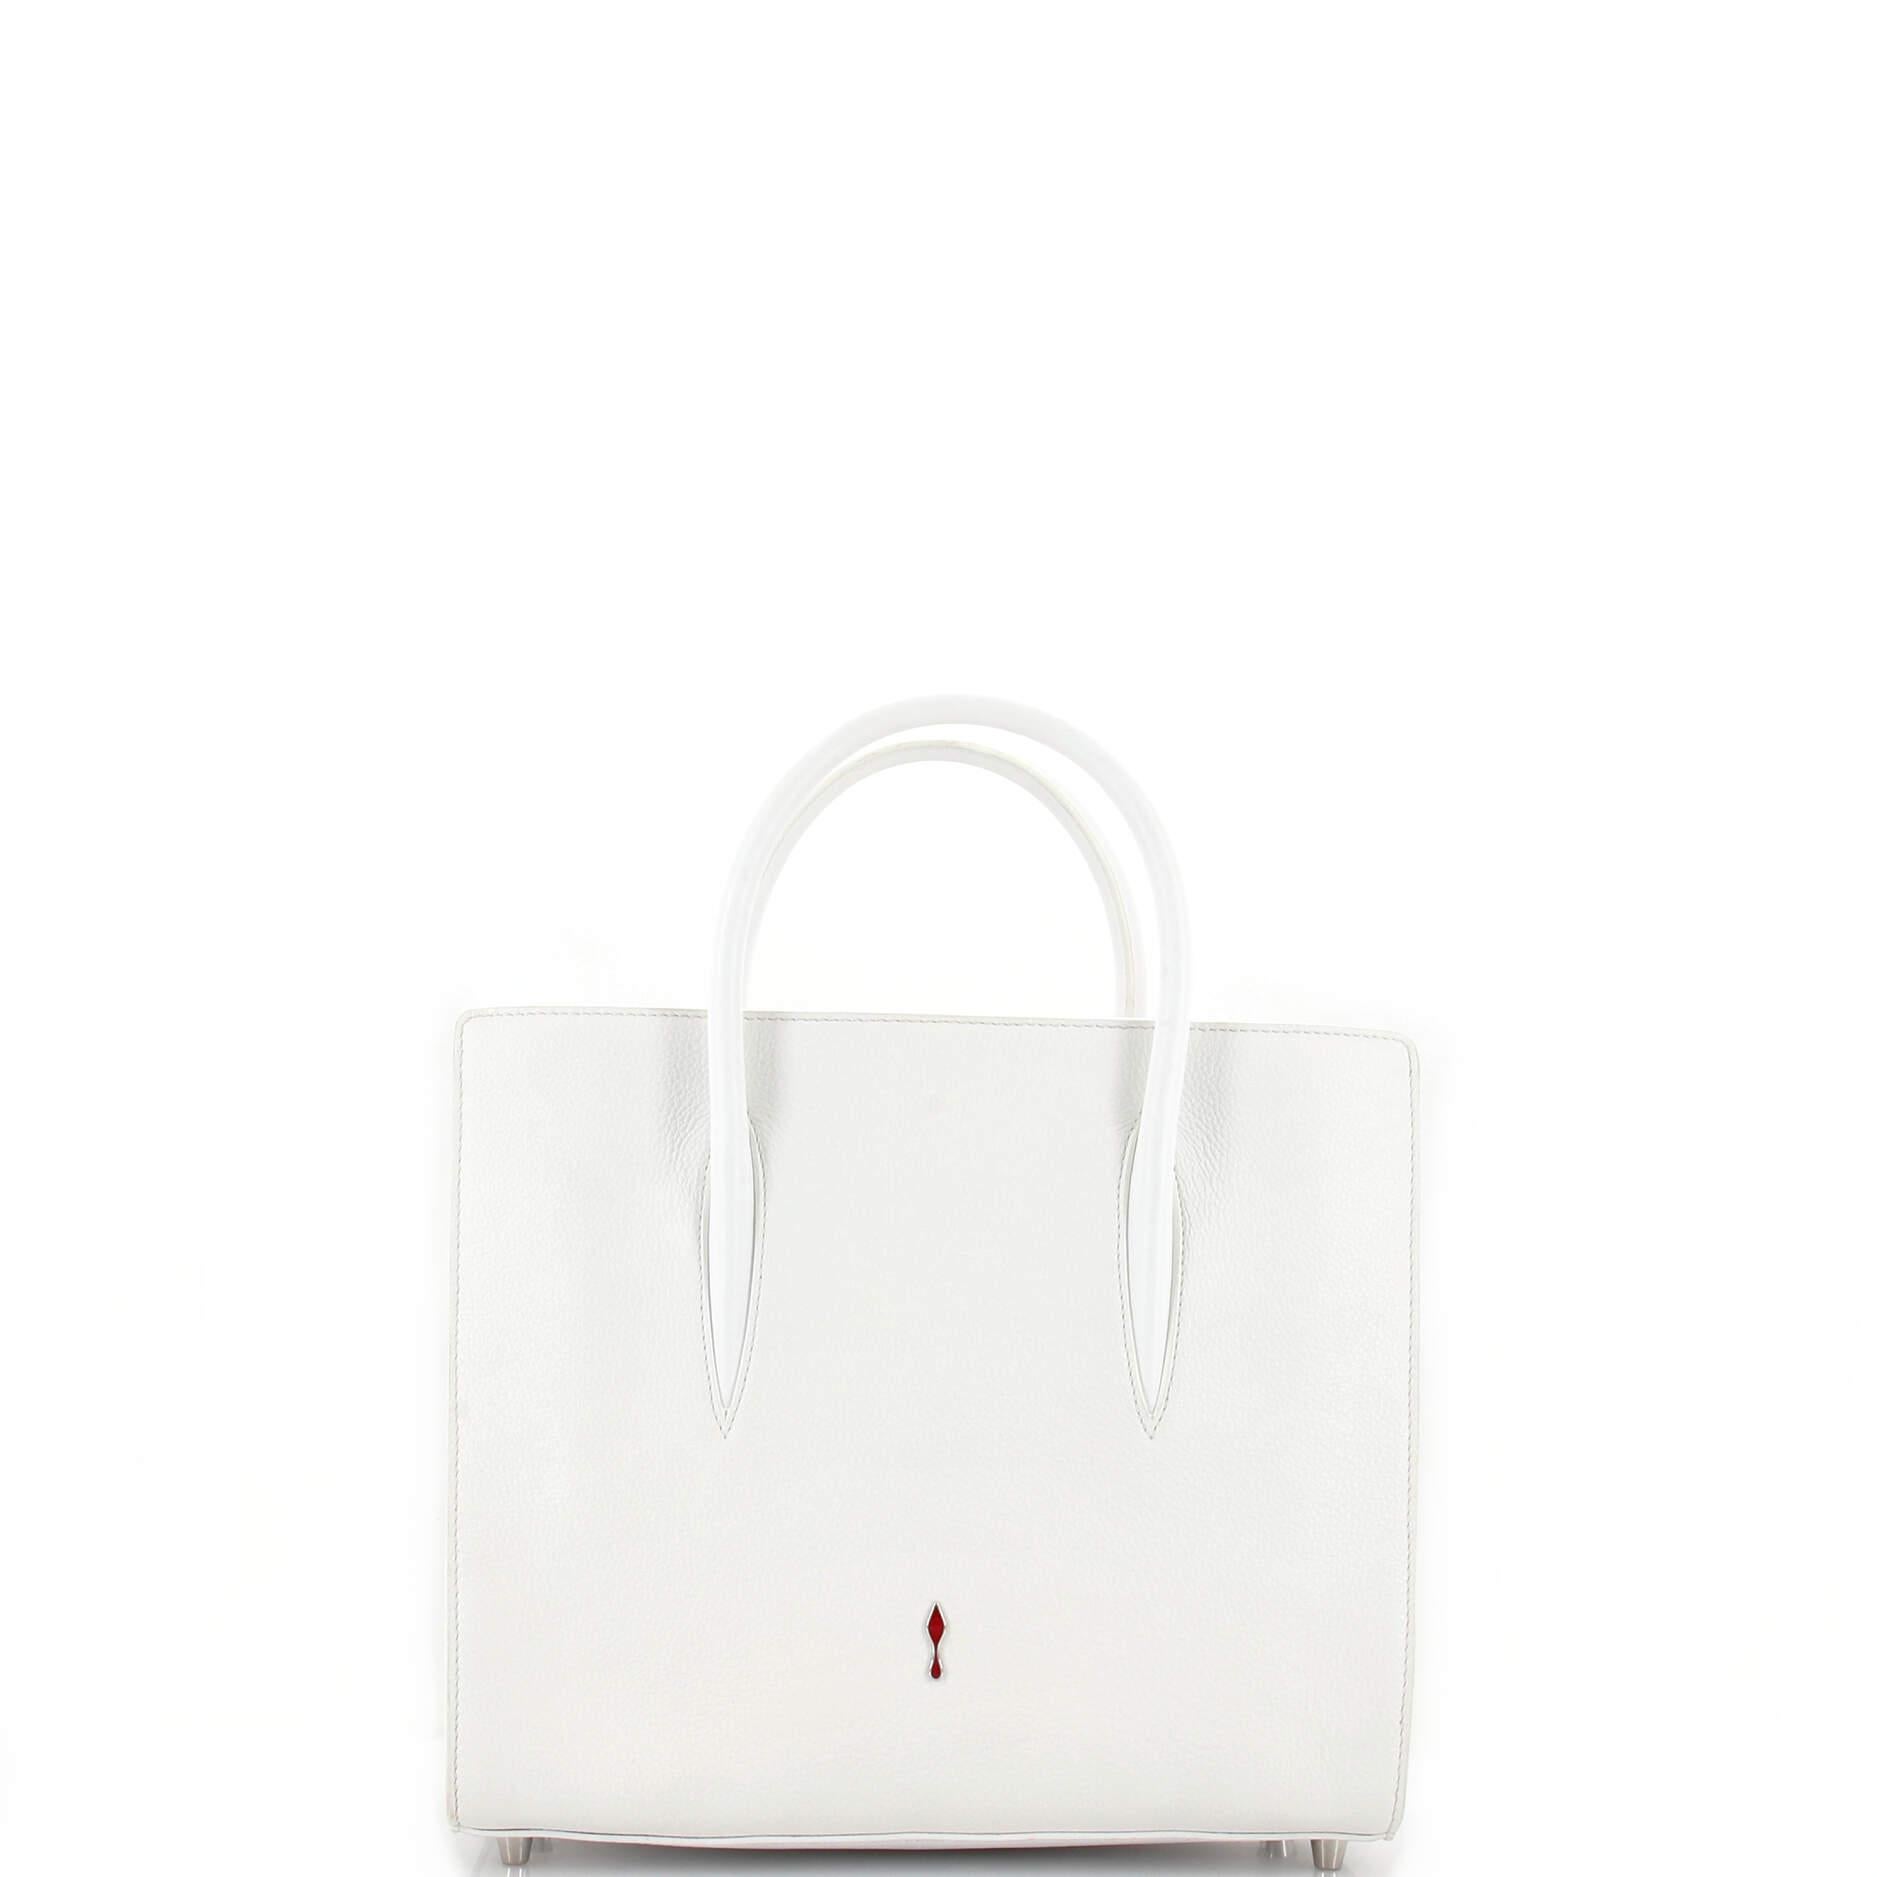 Christian Louboutin Paloma Tote Embellished Leather Medium In Good Condition For Sale In NY, NY